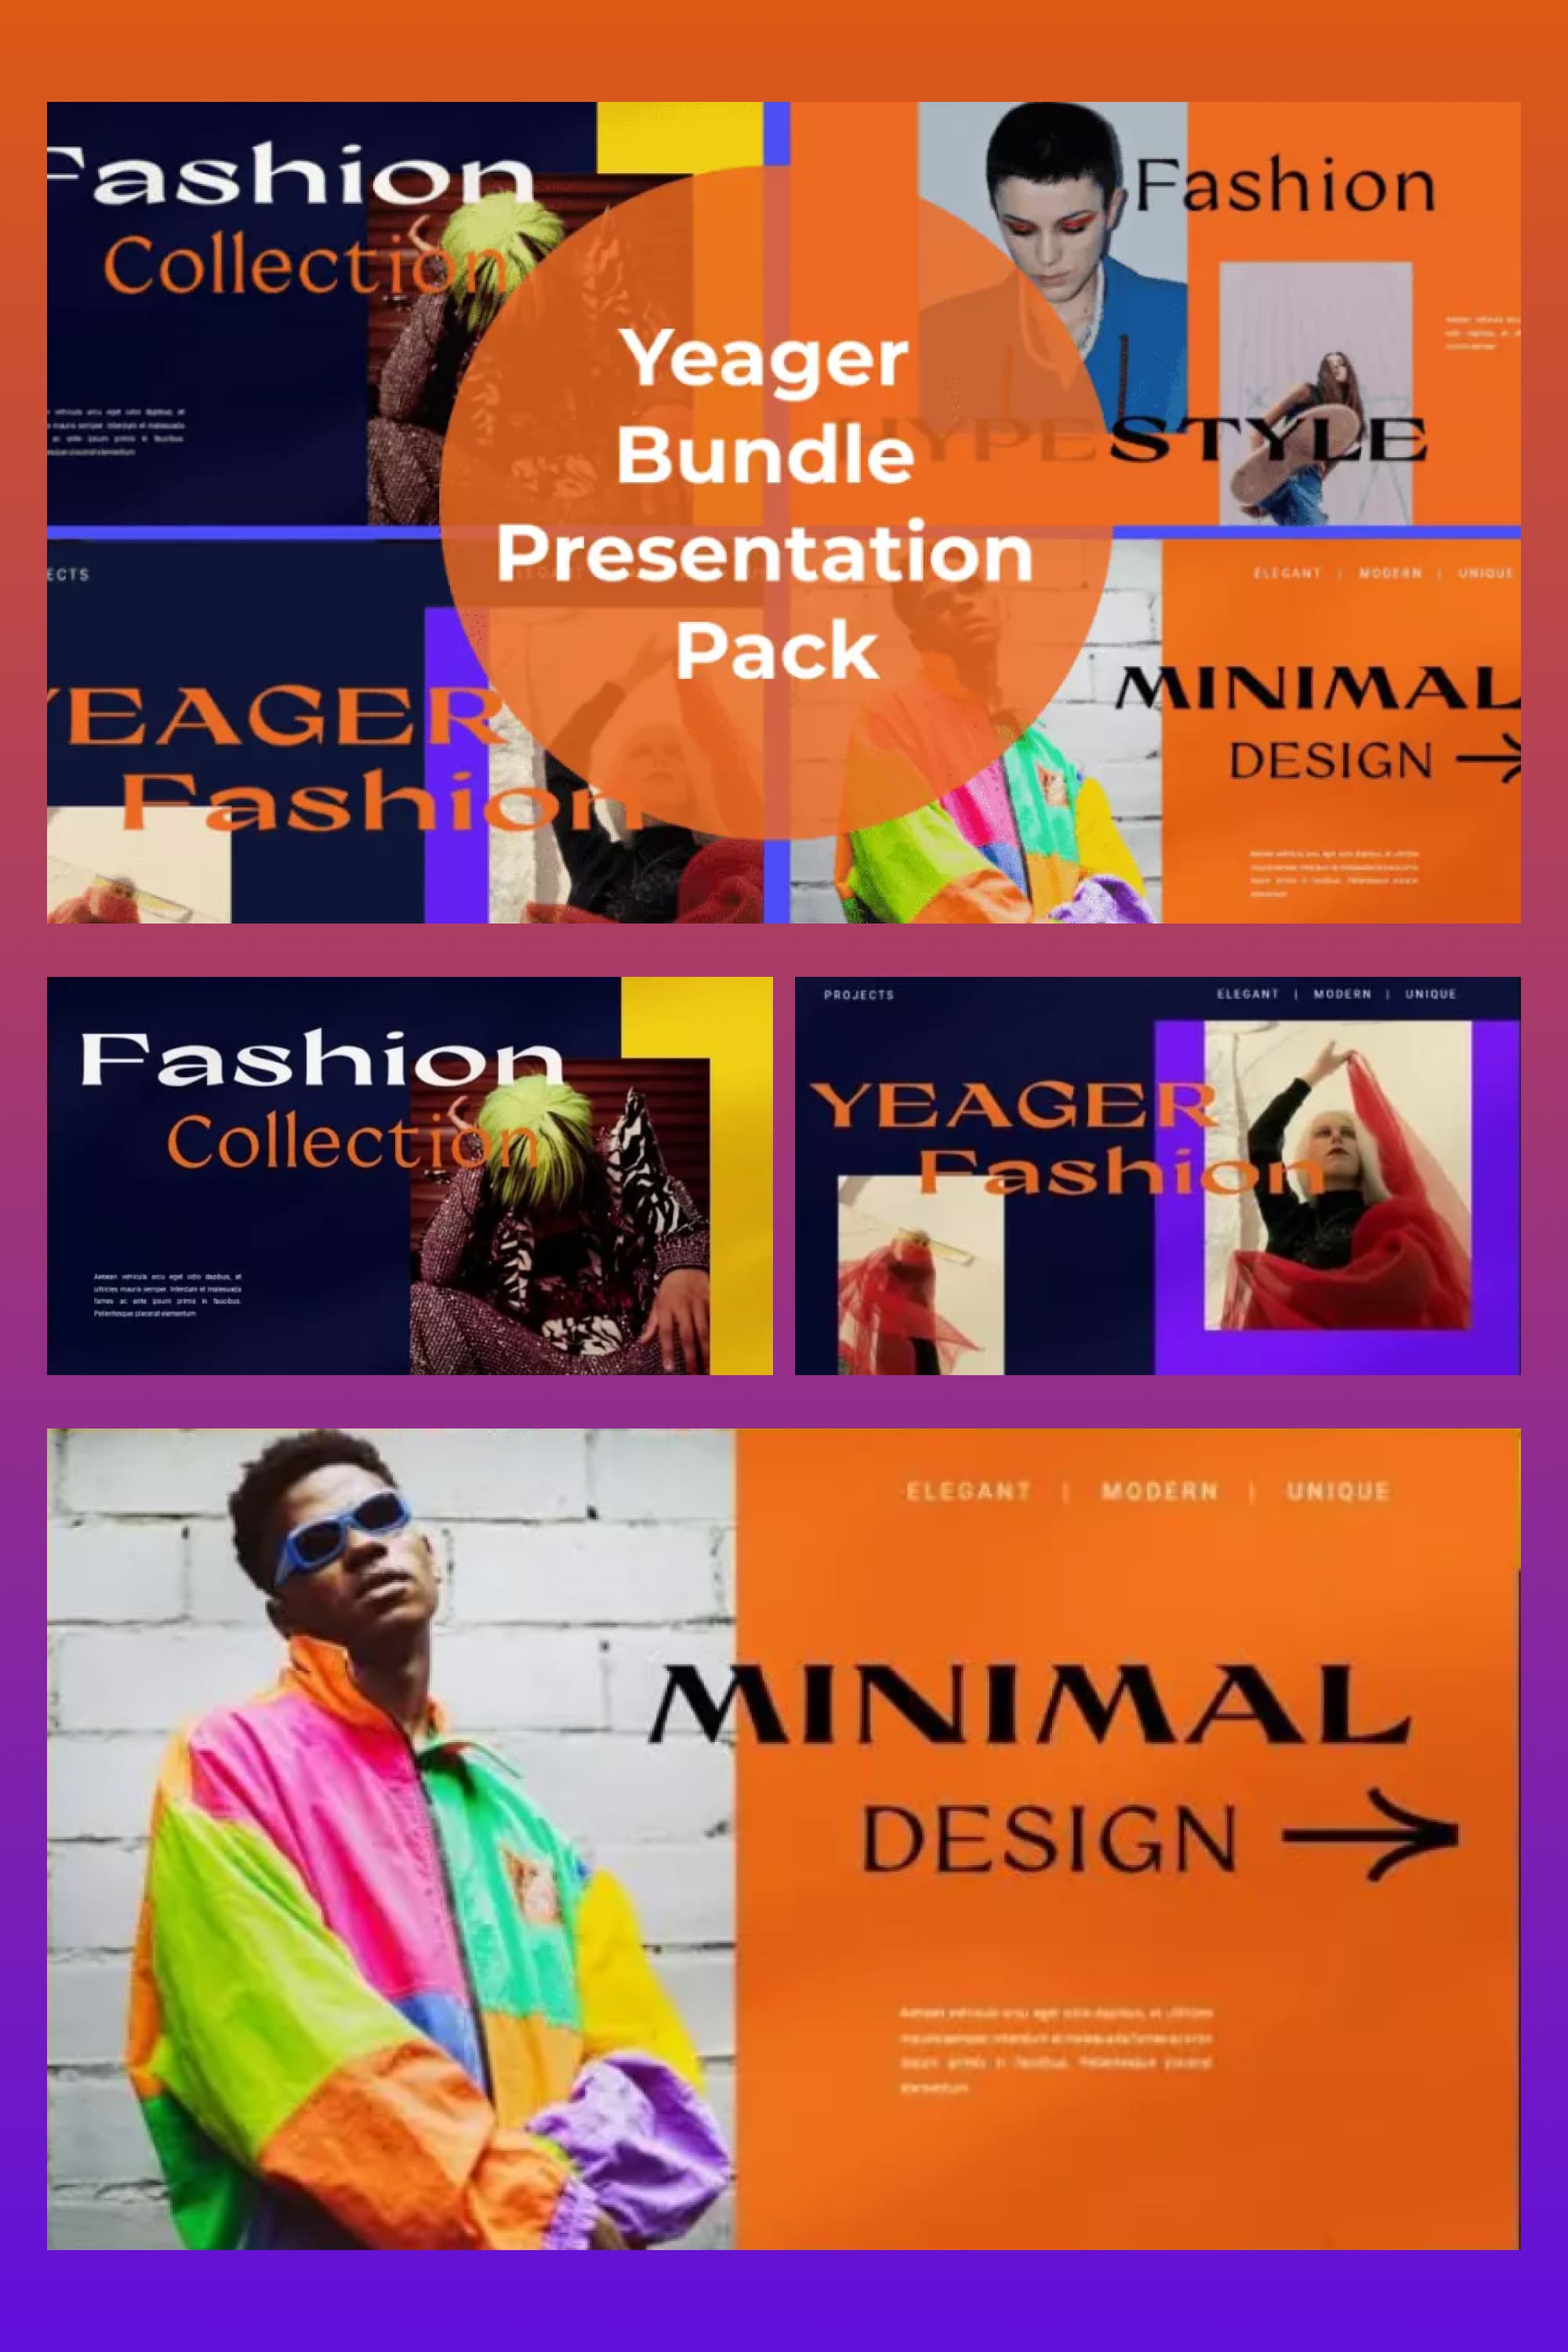 Mix of presentation pages with bright backgrounds, orange accents and photos of fashionistas.